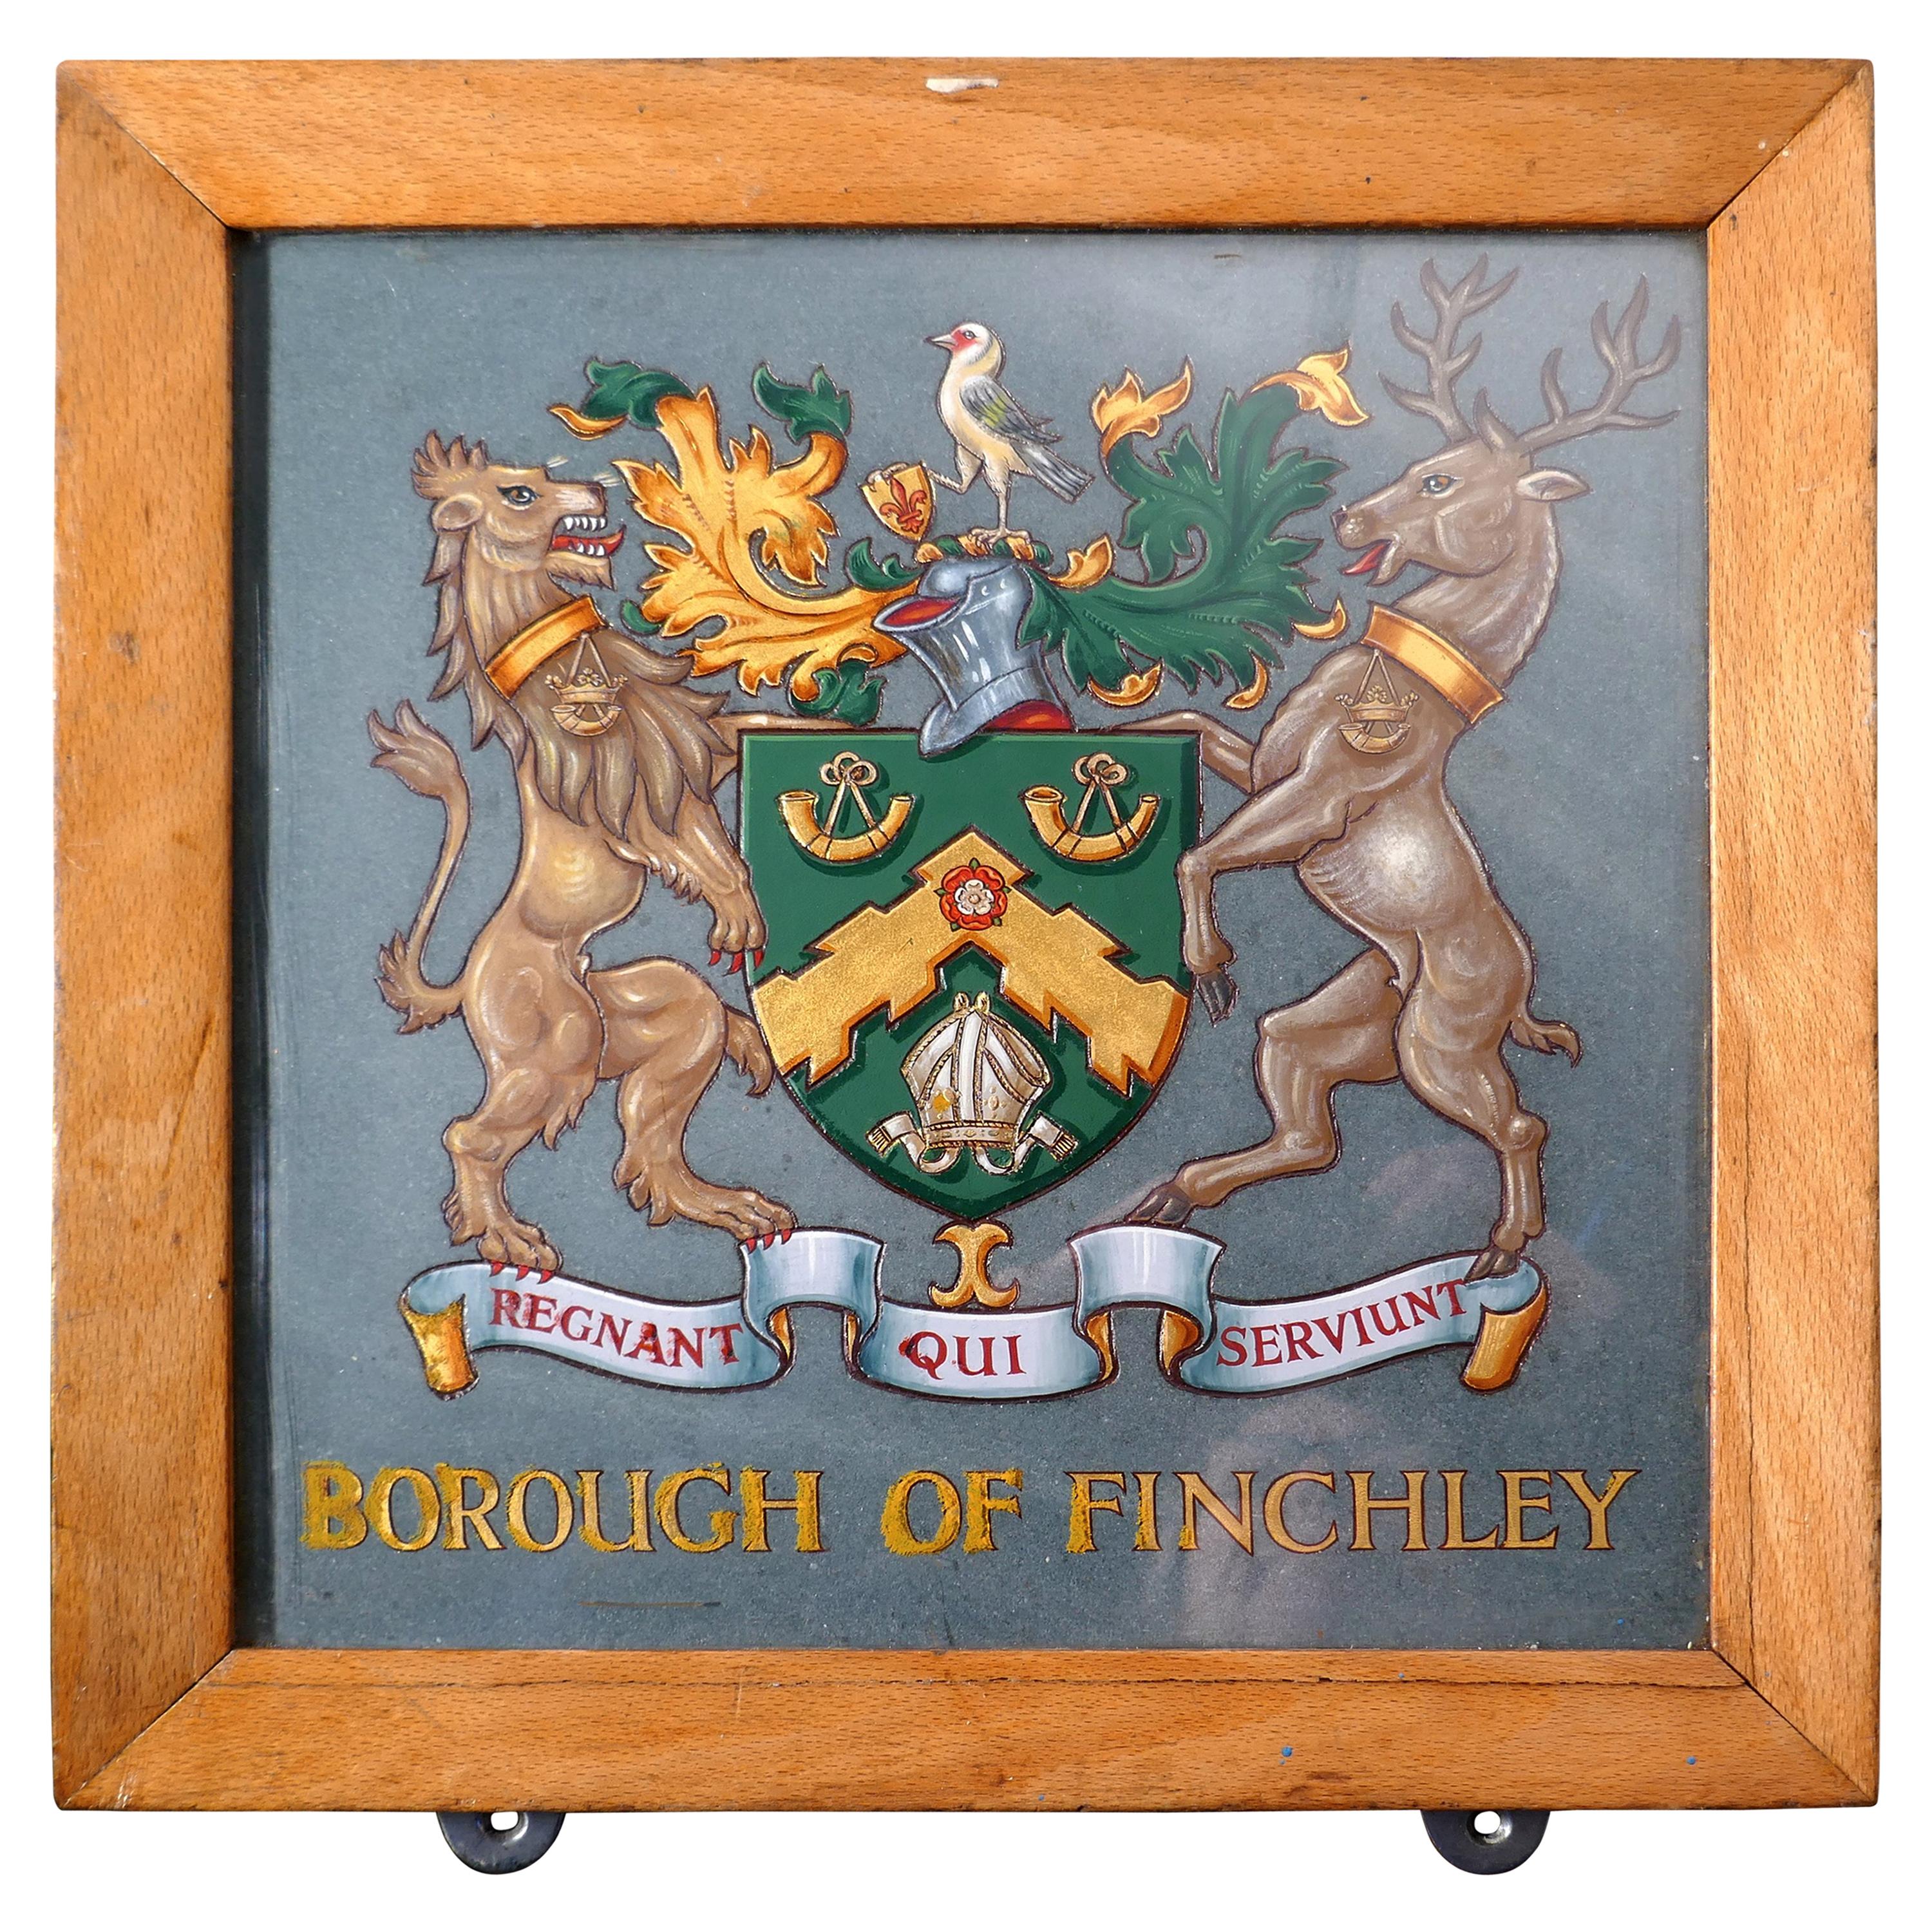 Heraldic Crest Framed & Painted on Slate from Borough of Finchley, Coat of Arms